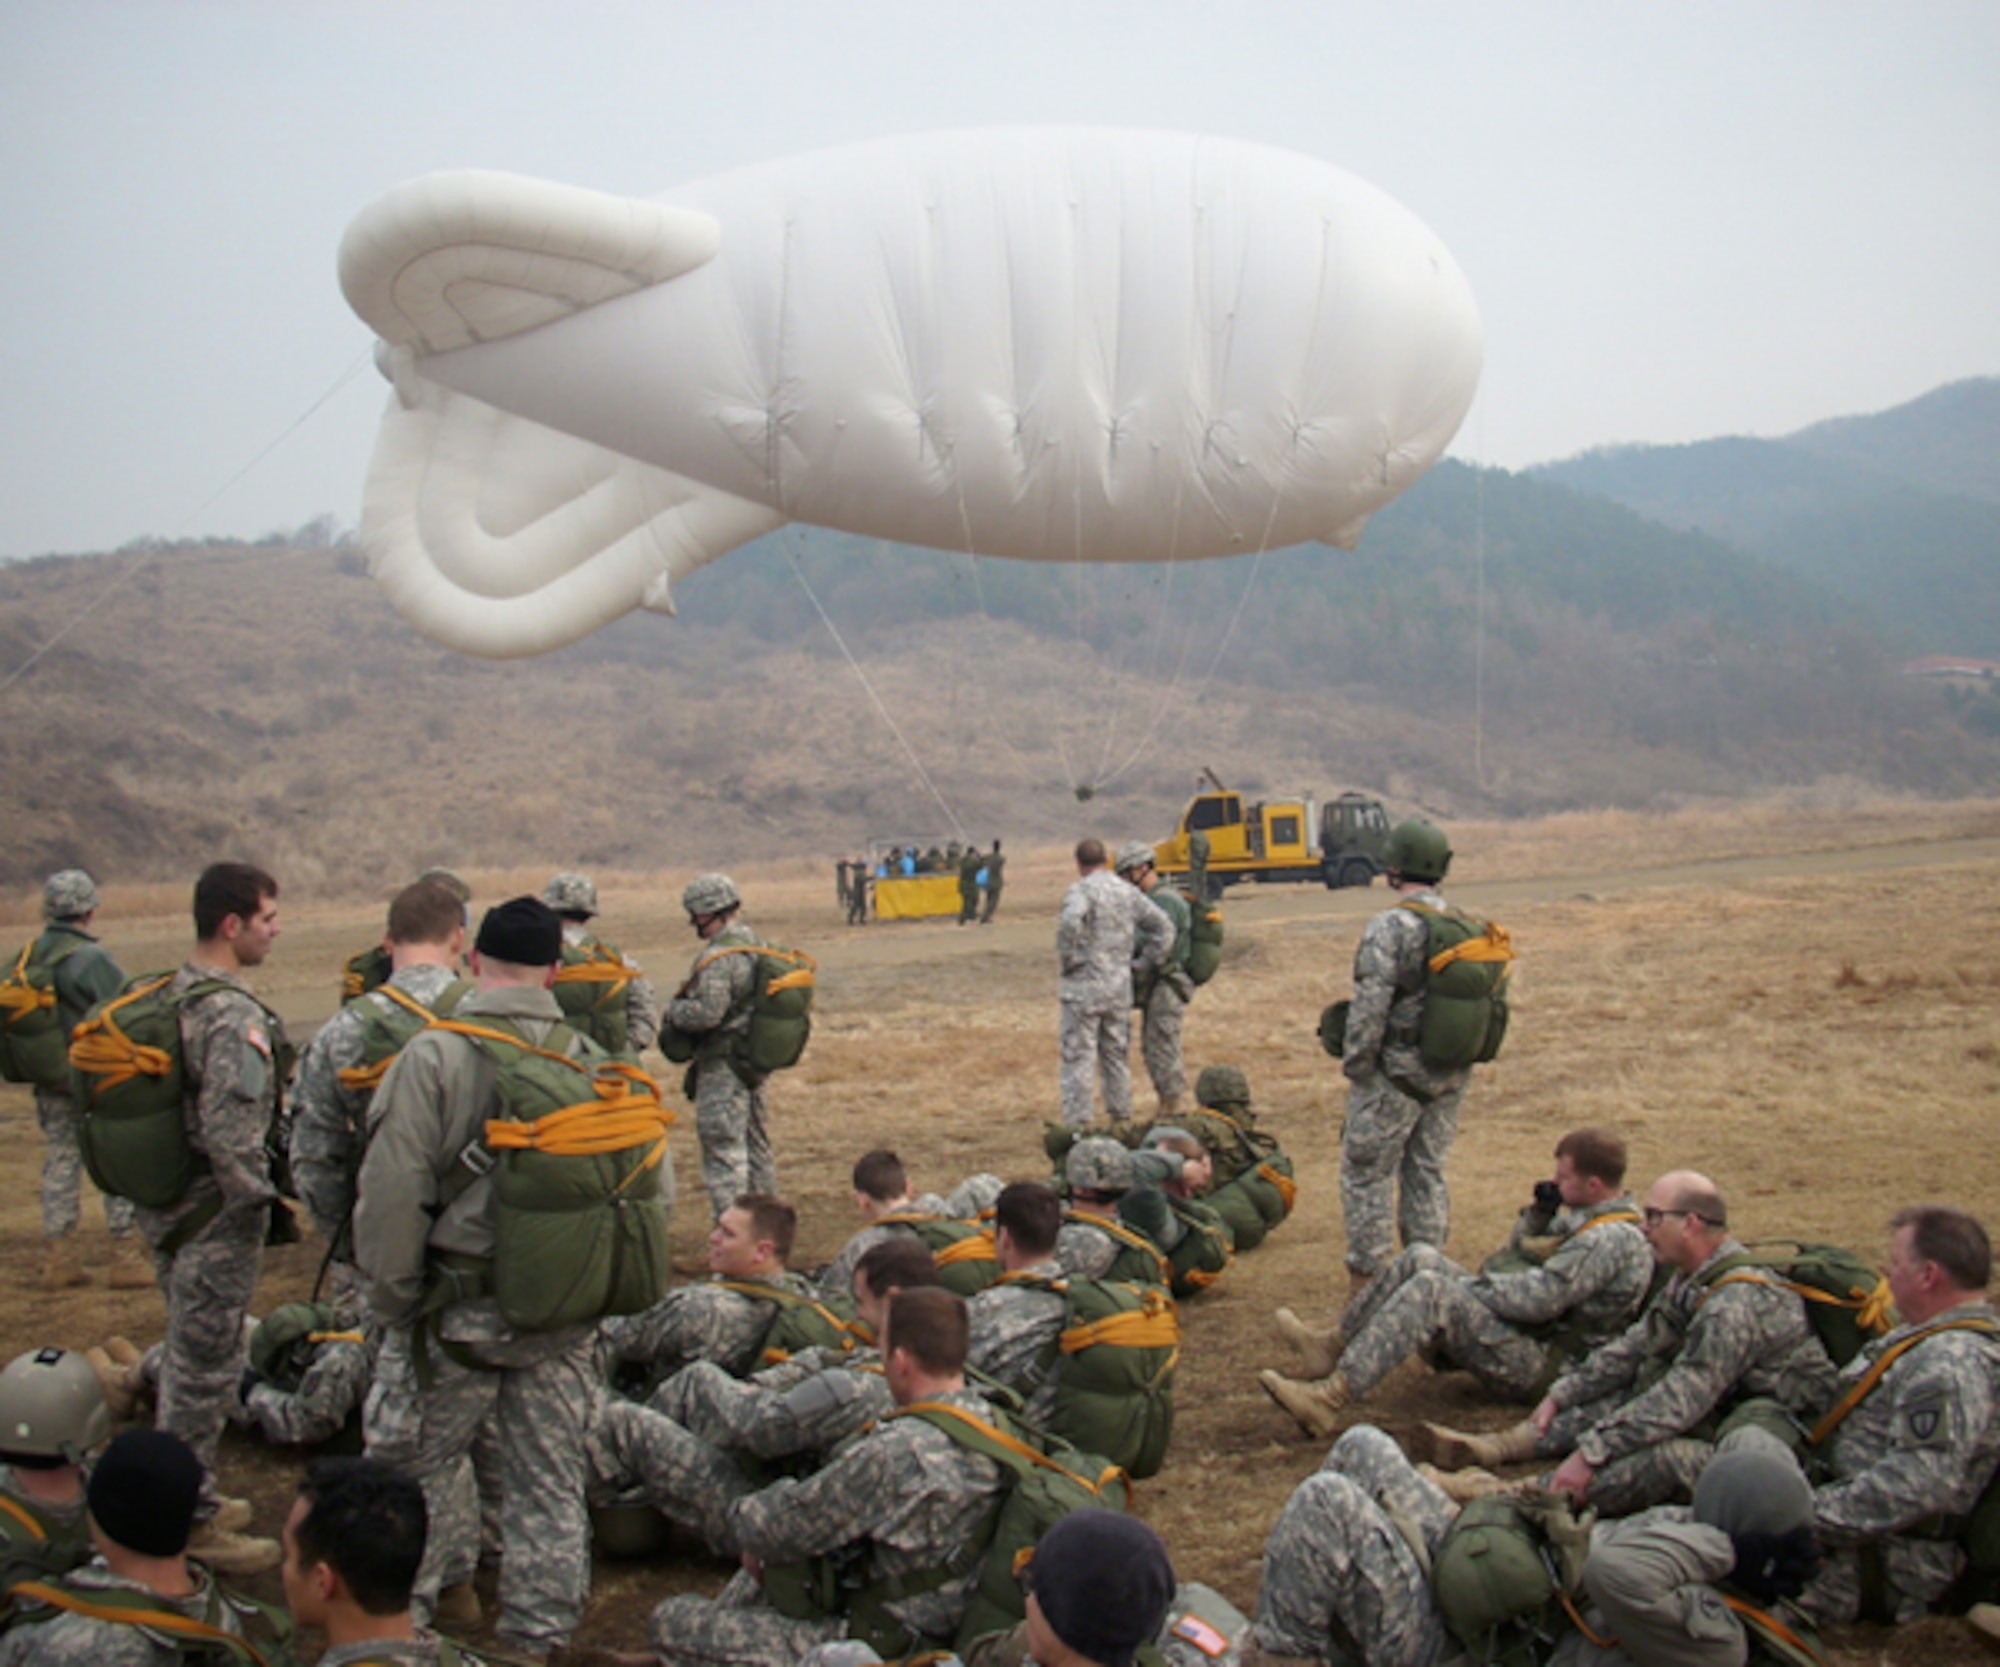 Special Operations Command Korea (SOCKOR) conducted airborne jumps with a helium blimp and gondola at the ROK Drop Zone, 5 March 2009. The jump was an opportunity for SOCKOR augmentees that are assigned or attached during Exercise Key Resolve 09 to jump with active SOCKOR members. Photo courtesy of Special Operations Command Korea (SOCKOR)